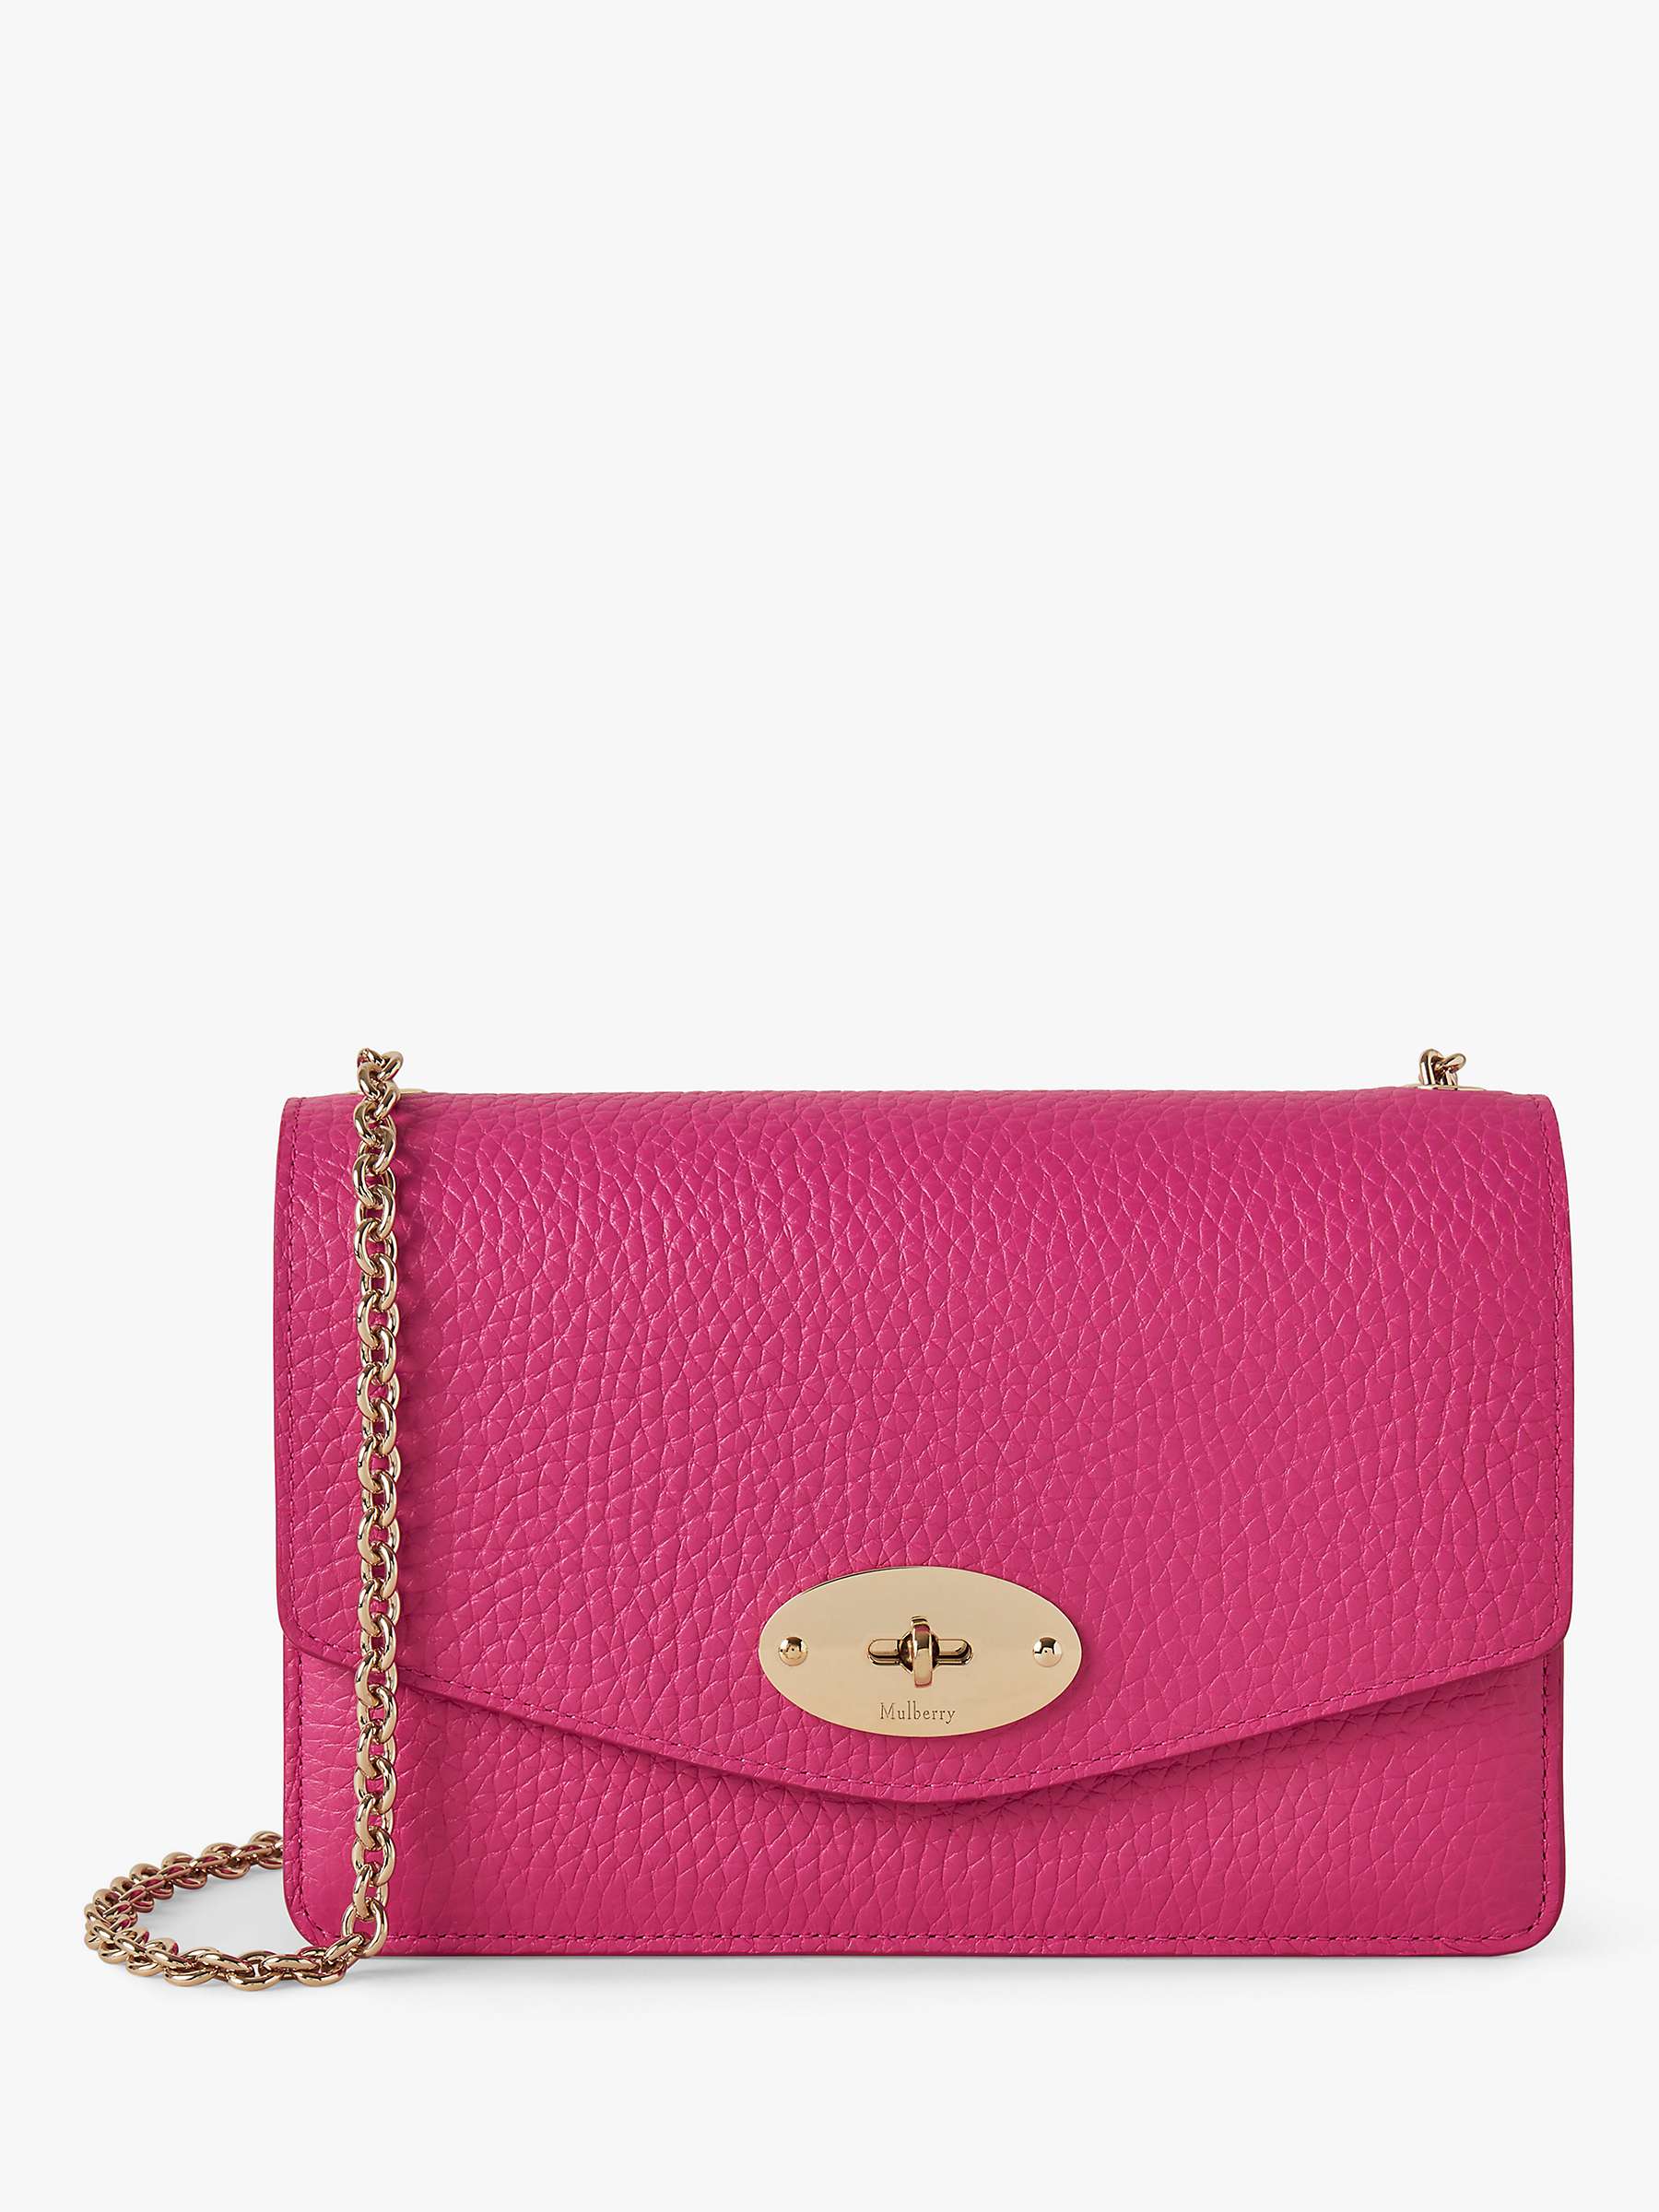 Buy Mulberry Small Darley Heavy Grain Leather Cross Body Bag Online at johnlewis.com